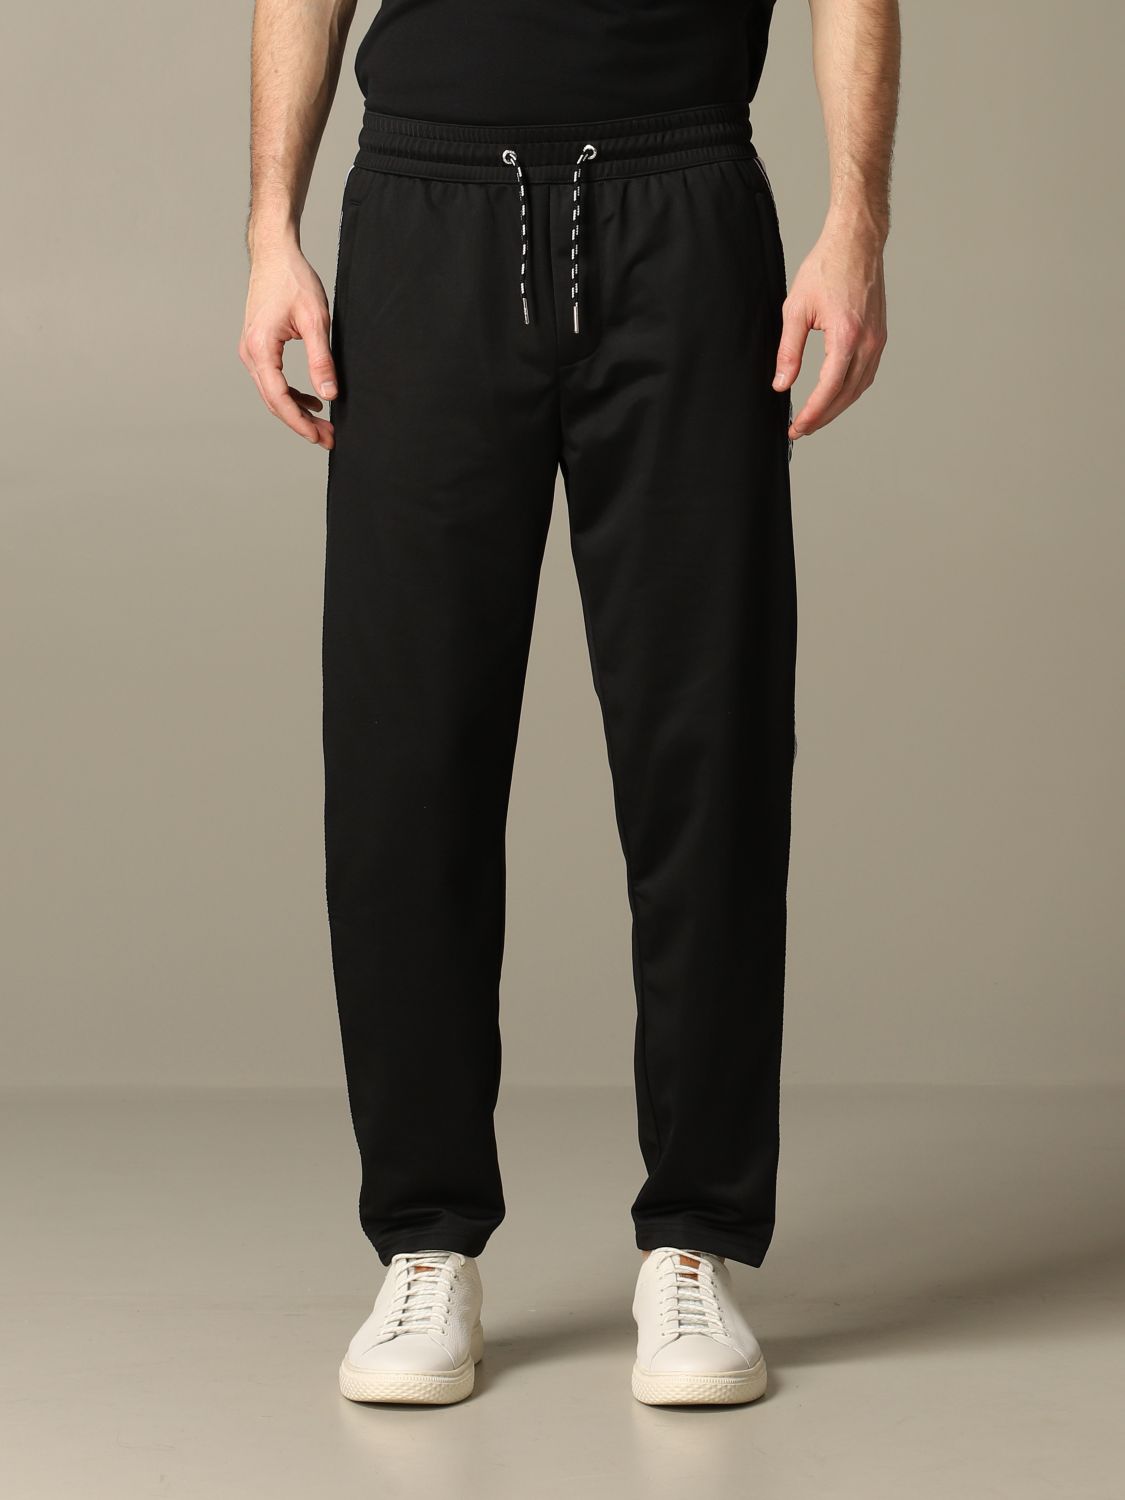 Armani Exchange Outlet: jogging trousers in acetate with logoed bands -  Black | Armani Exchange pants 3HZPFM Z8M8Z online on 